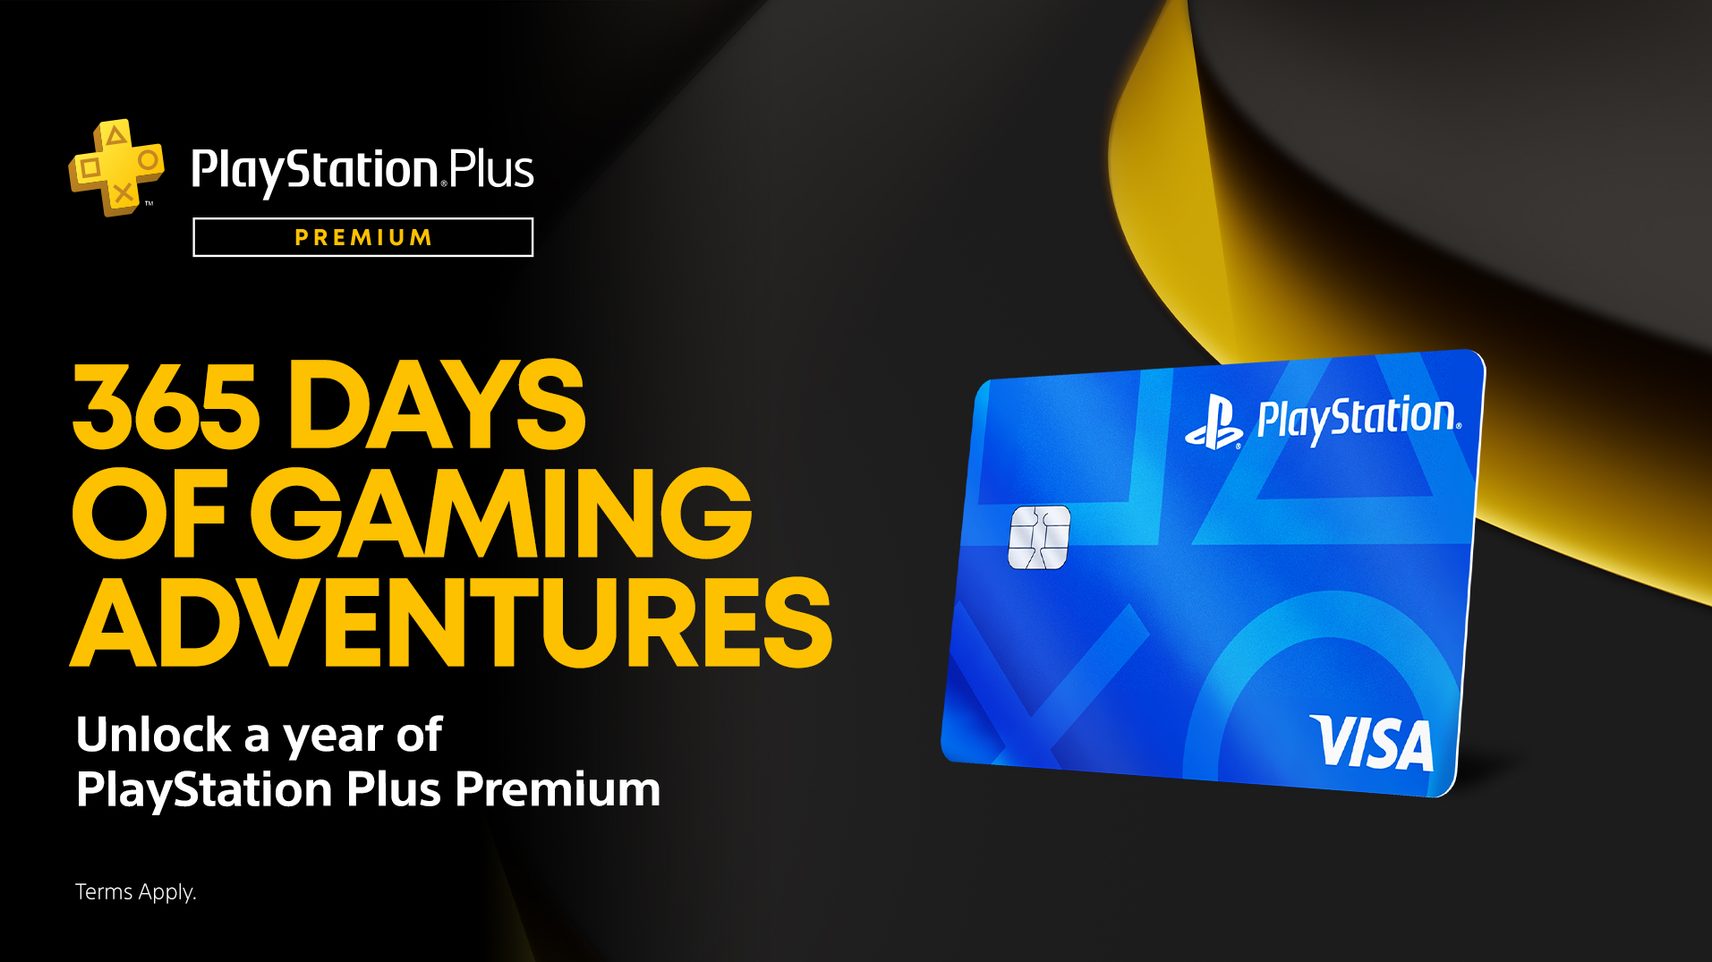 Promotional Image of PlayStation Credit Card. 